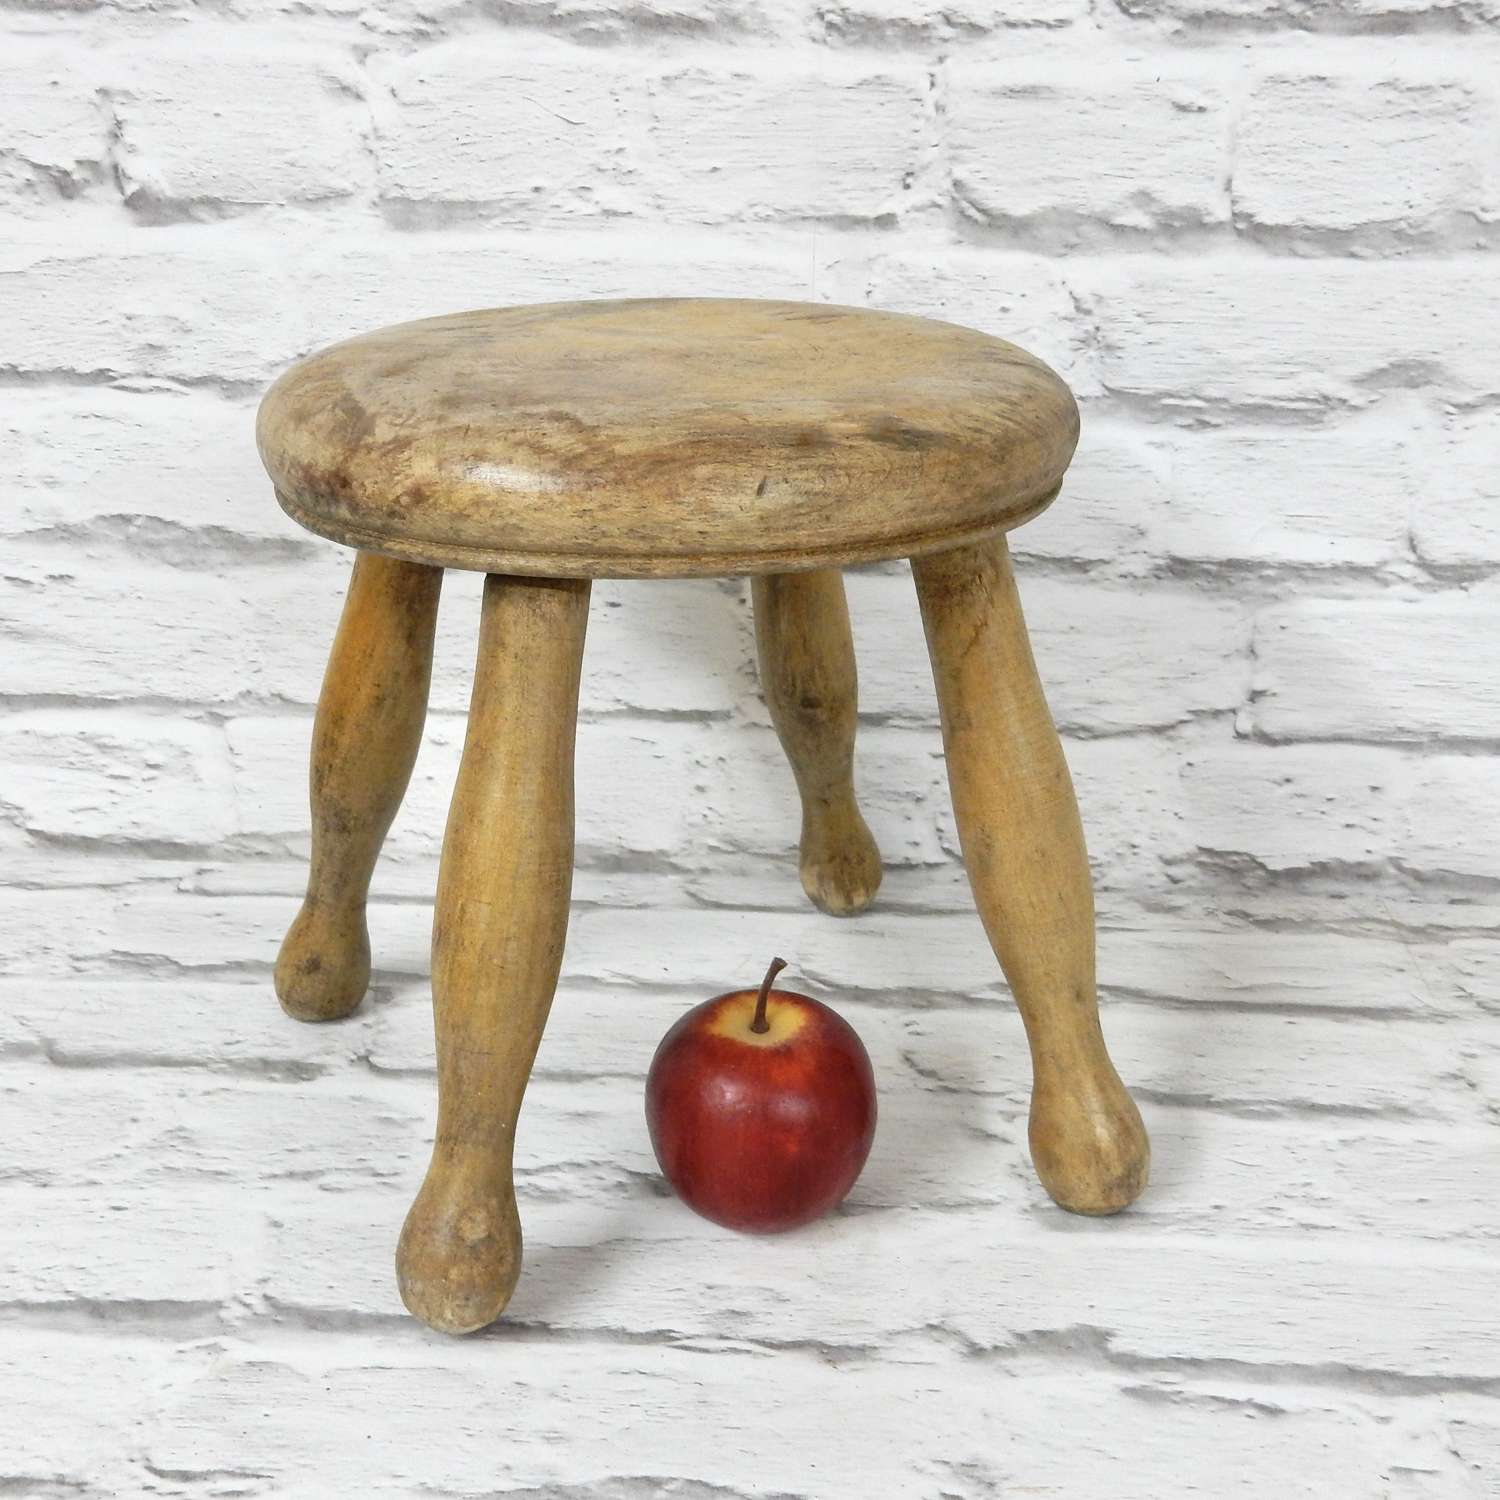 Pint-sized Country Stool